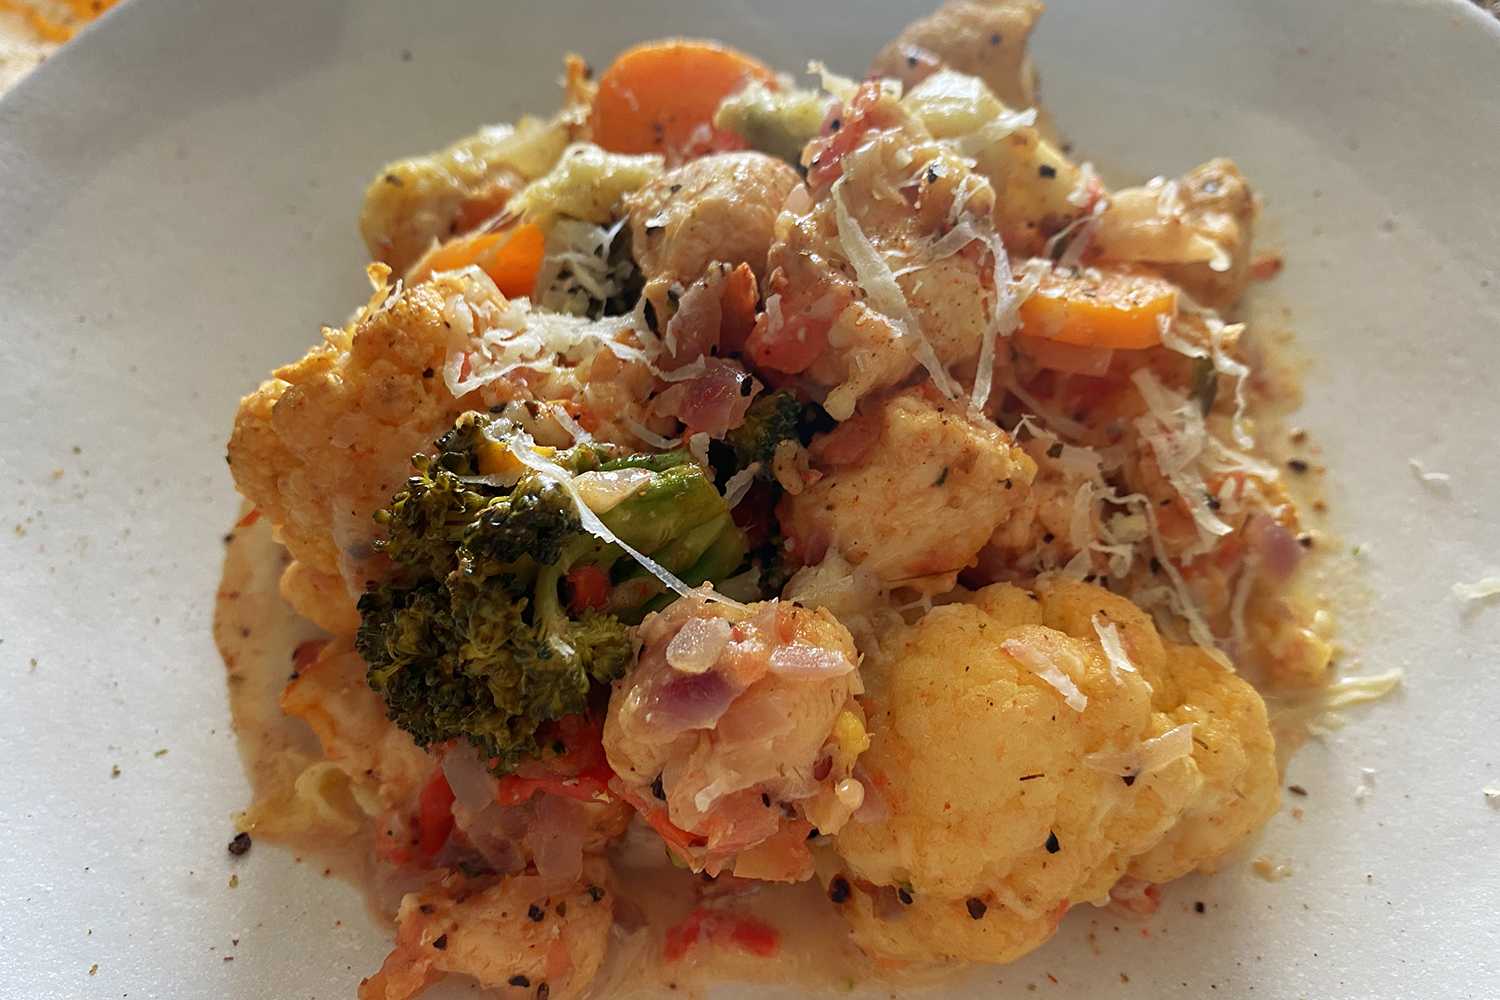 chicken cubes with broccoli florets, cauliflower and carrot cubes topped with melted cheese